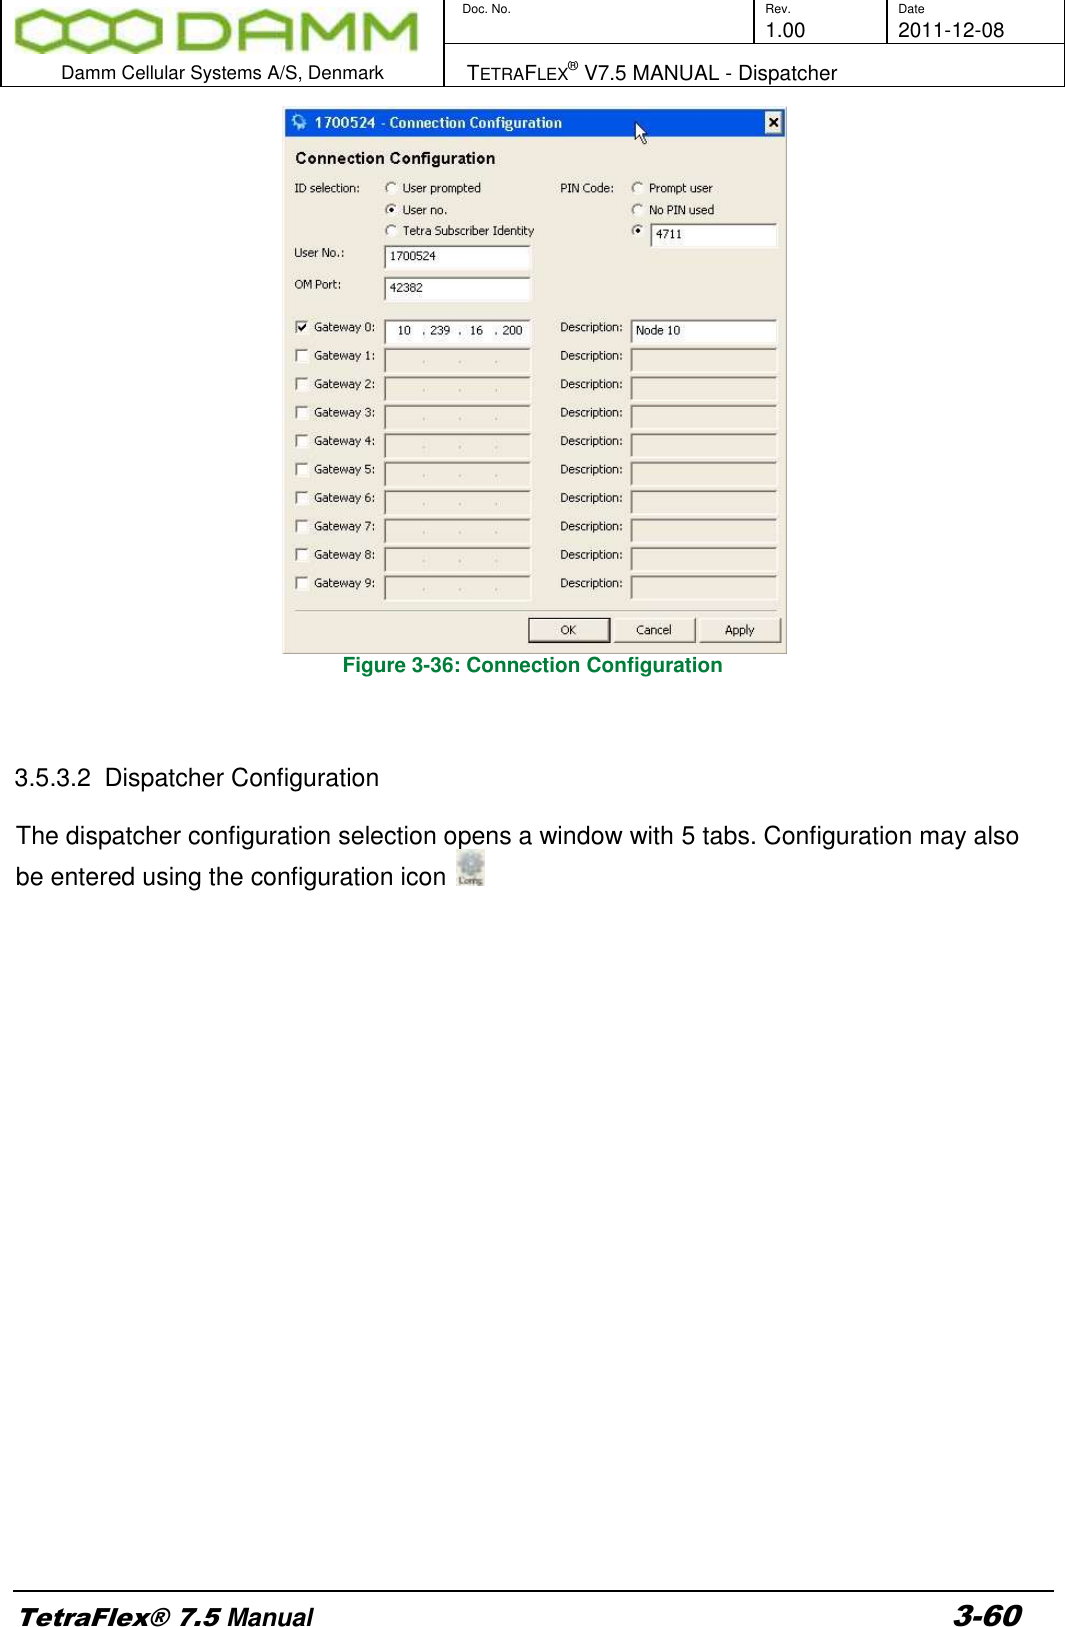        Doc. No. Rev. Date     1.00 2011-12-08  Damm Cellular Systems A/S, Denmark   TETRAFLEX® V7.5 MANUAL - Dispatcher  TetraFlex® 7.5 Manual 3-60  Figure 3-36: Connection Configuration    3.5.3.2  Dispatcher Configuration  The dispatcher configuration selection opens a window with 5 tabs. Configuration may also be entered using the configuration icon                          